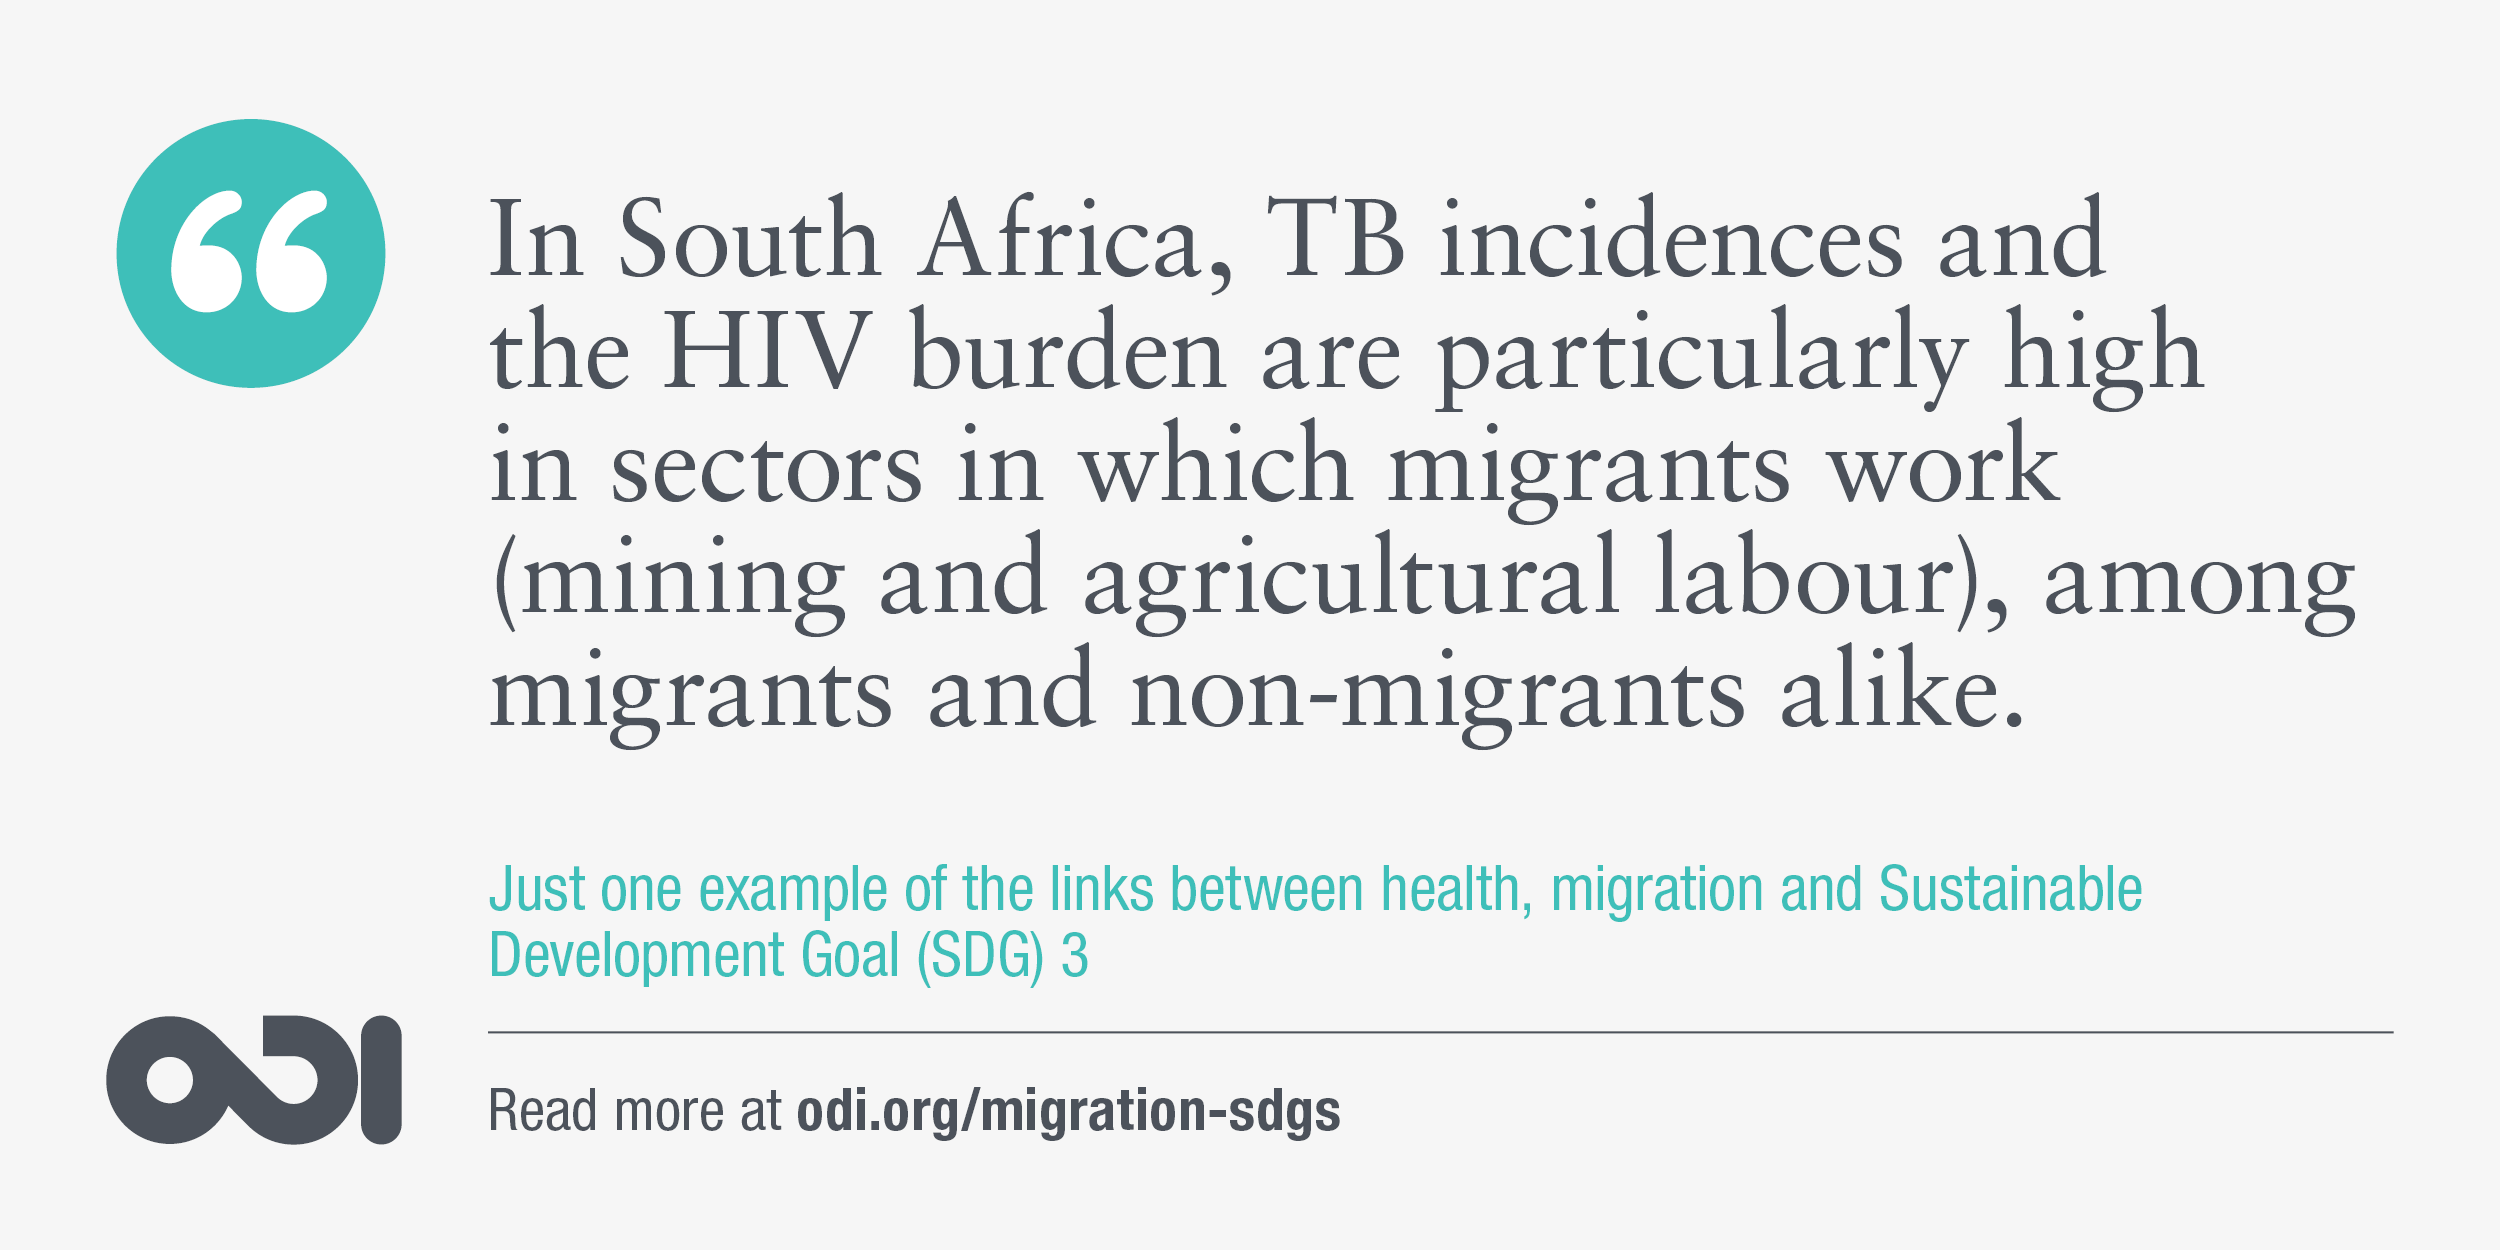 The links between health, migration and SDG 3.